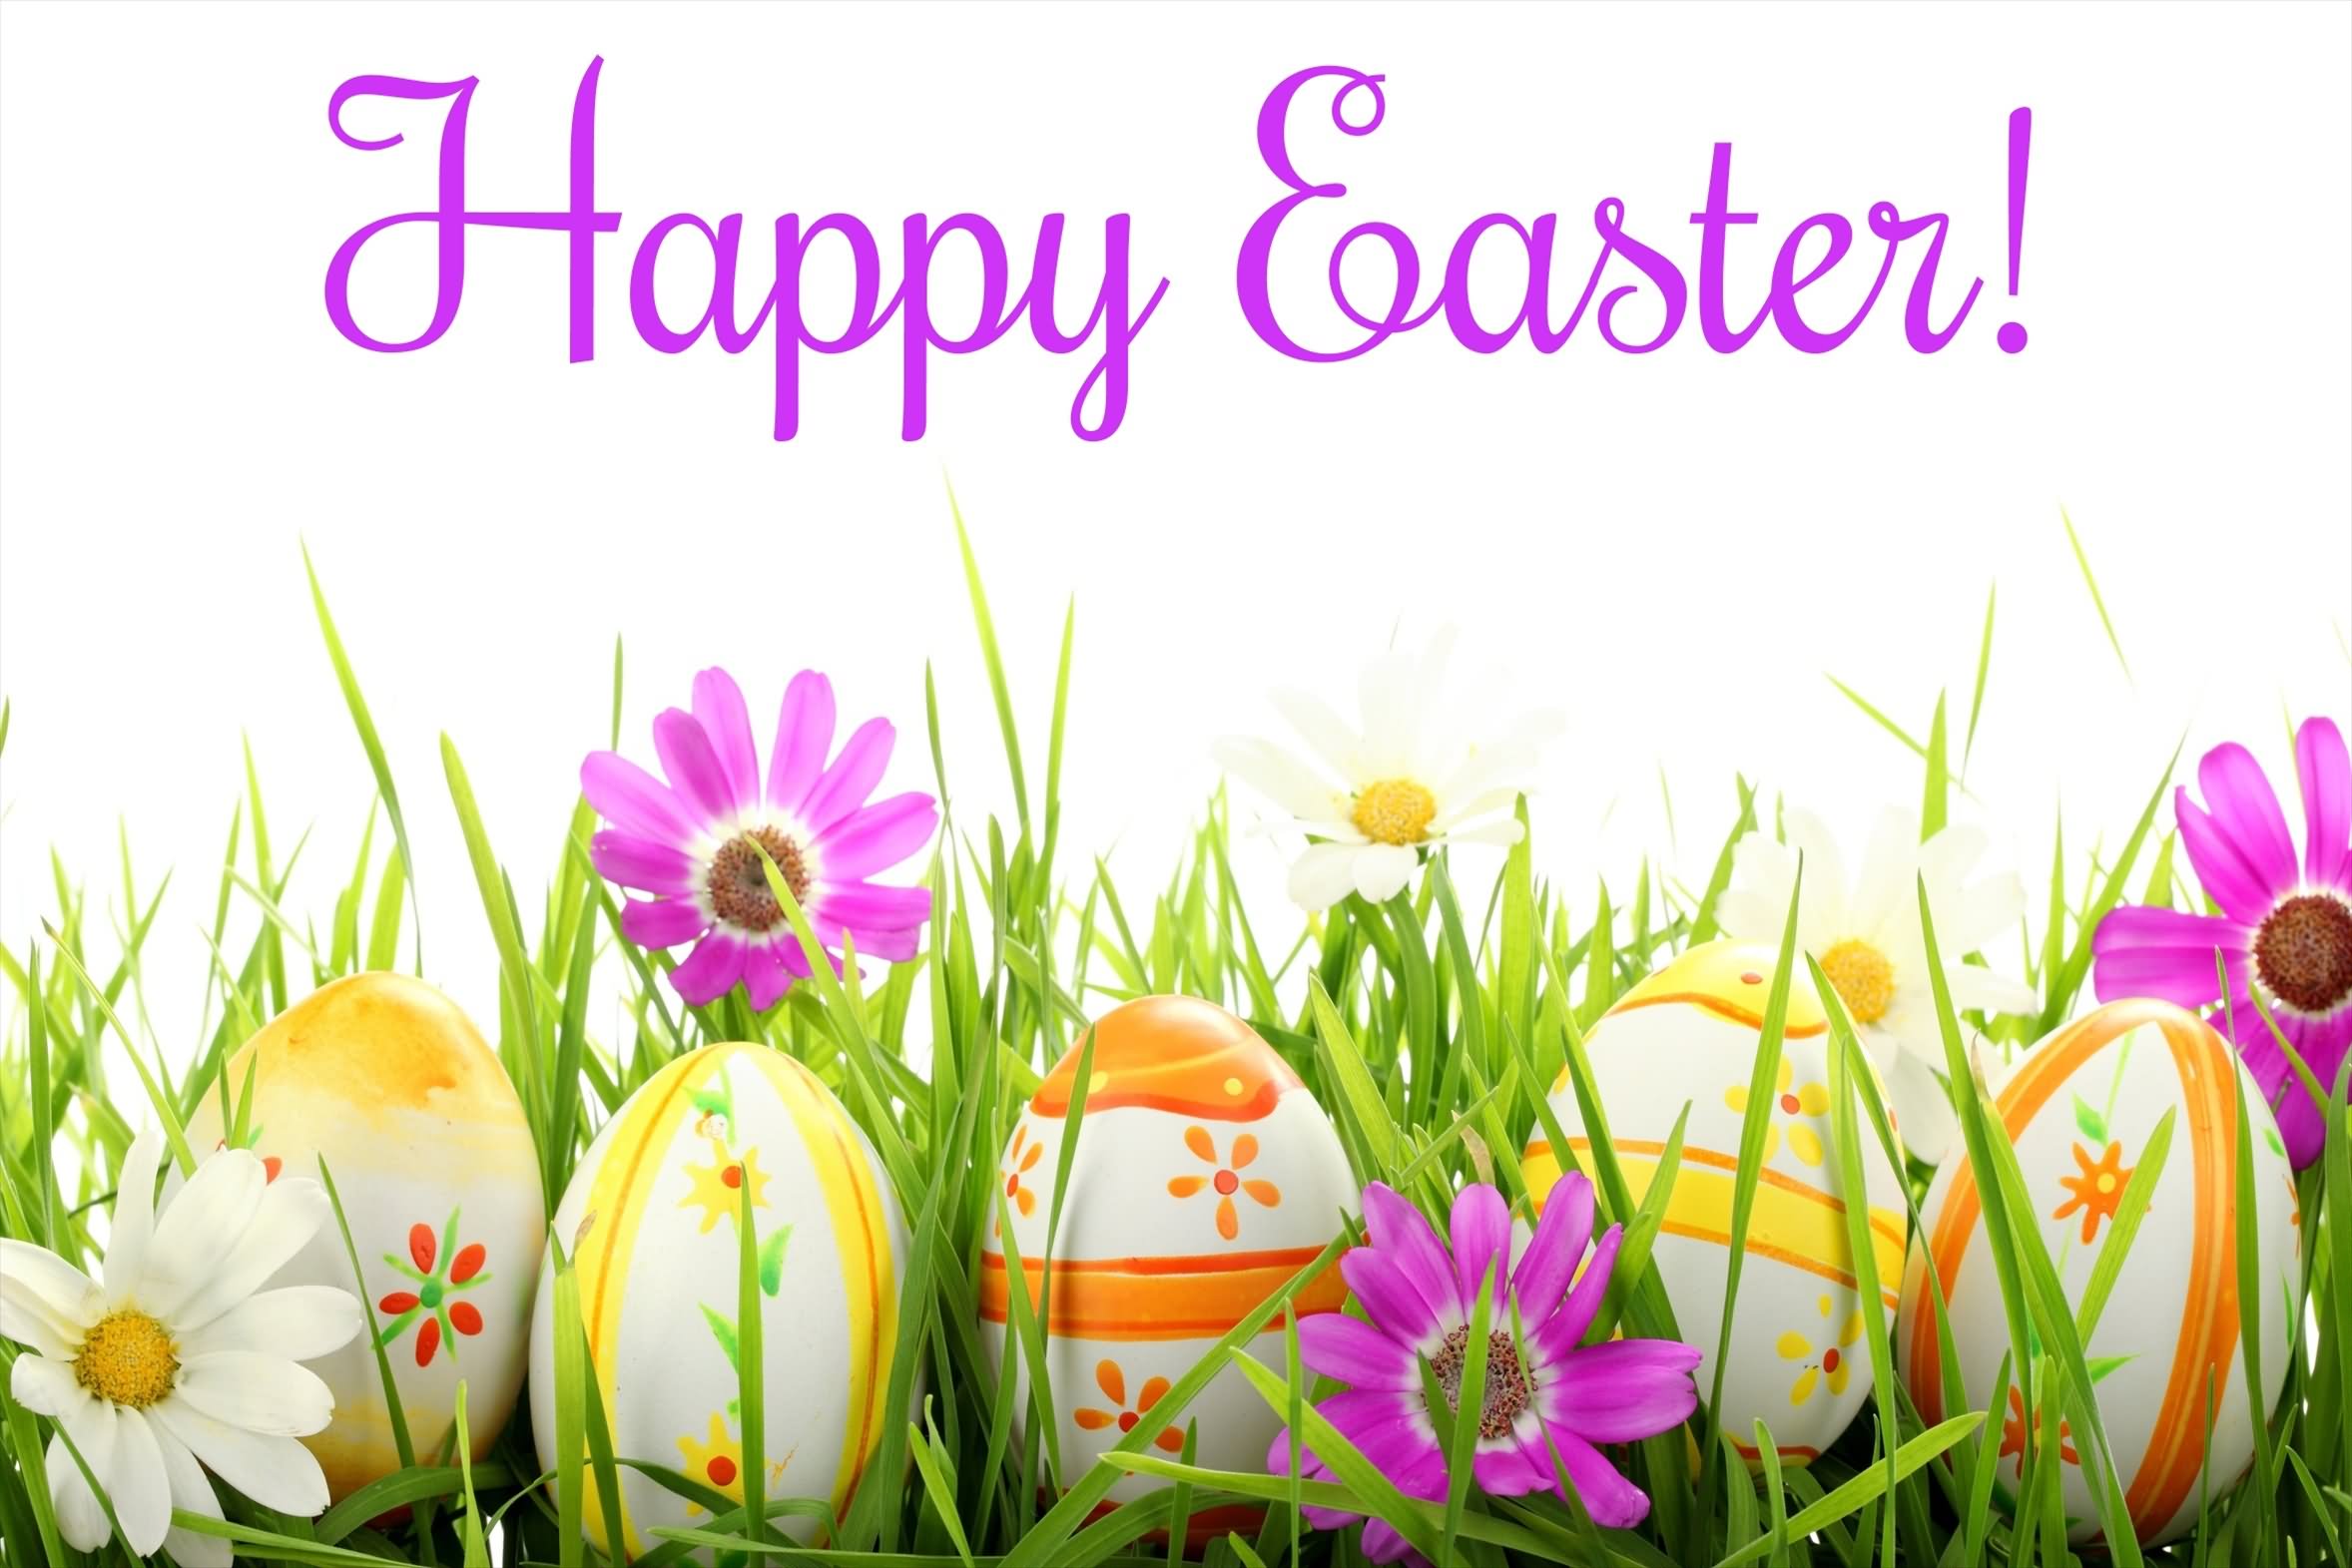 Happy Easter Image Quotes Wishes Pictures Sayings